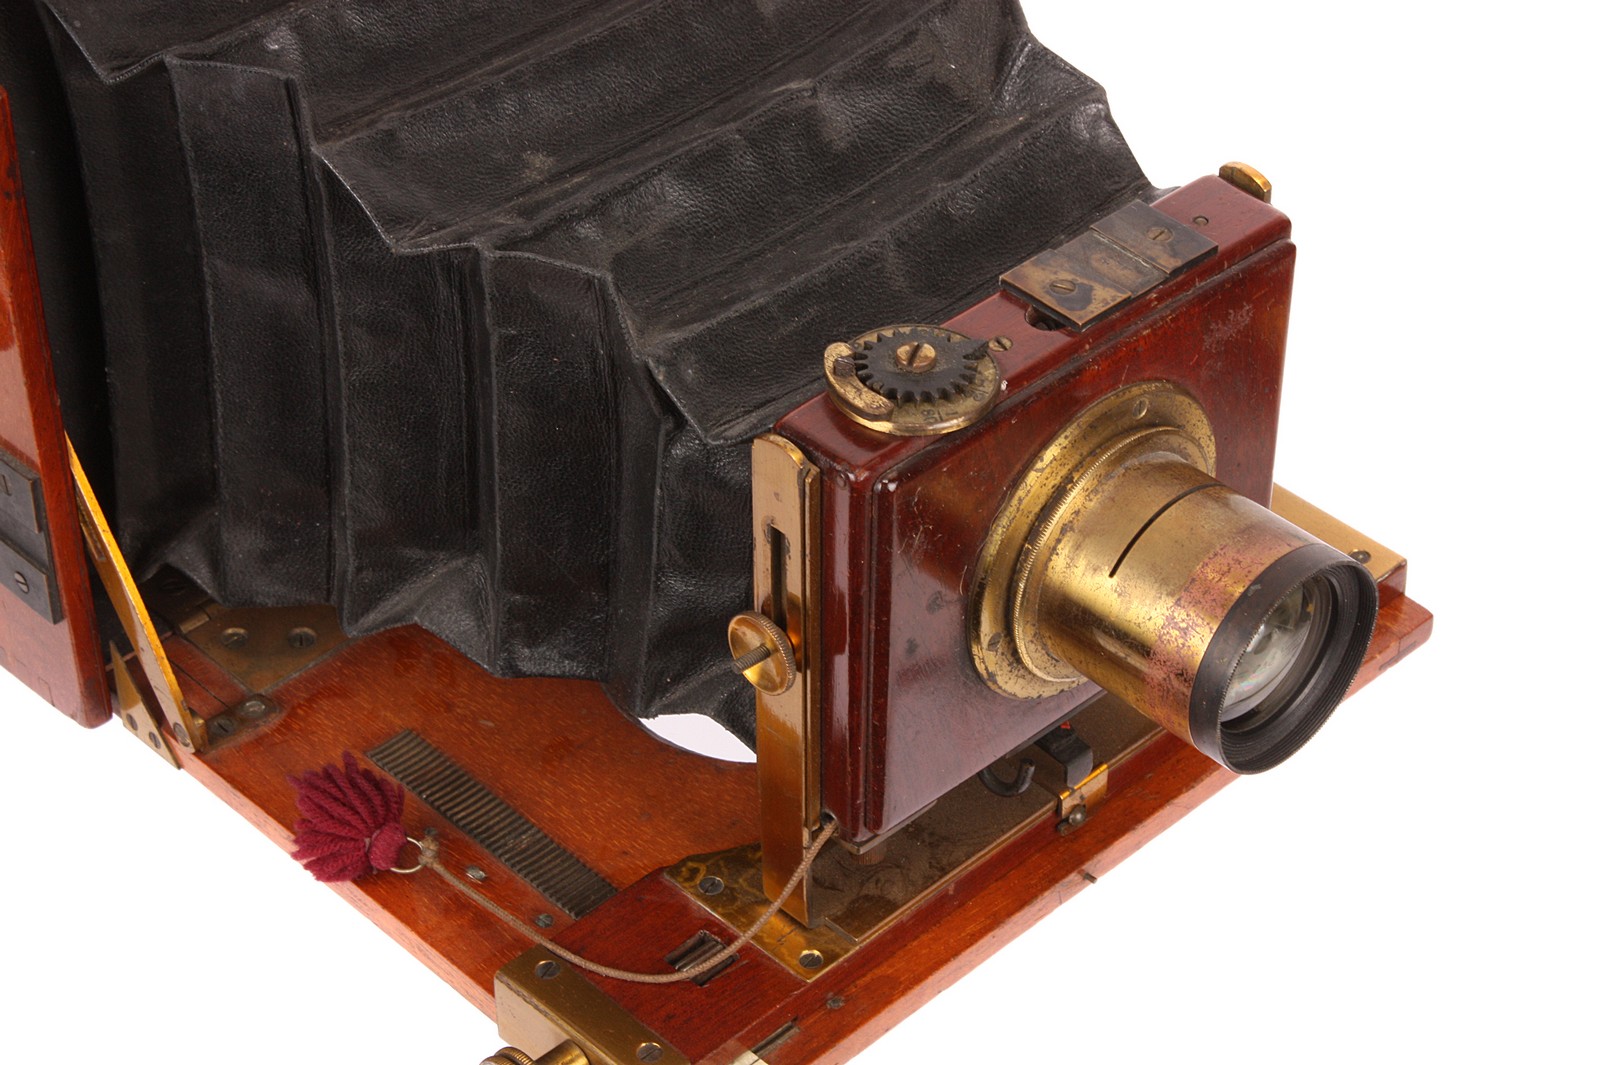 A J. Lizars Challenge Mahogany Box Camera, 4½x6½, with unmarked Waterhouse-stop brass lens, in - Image 2 of 2